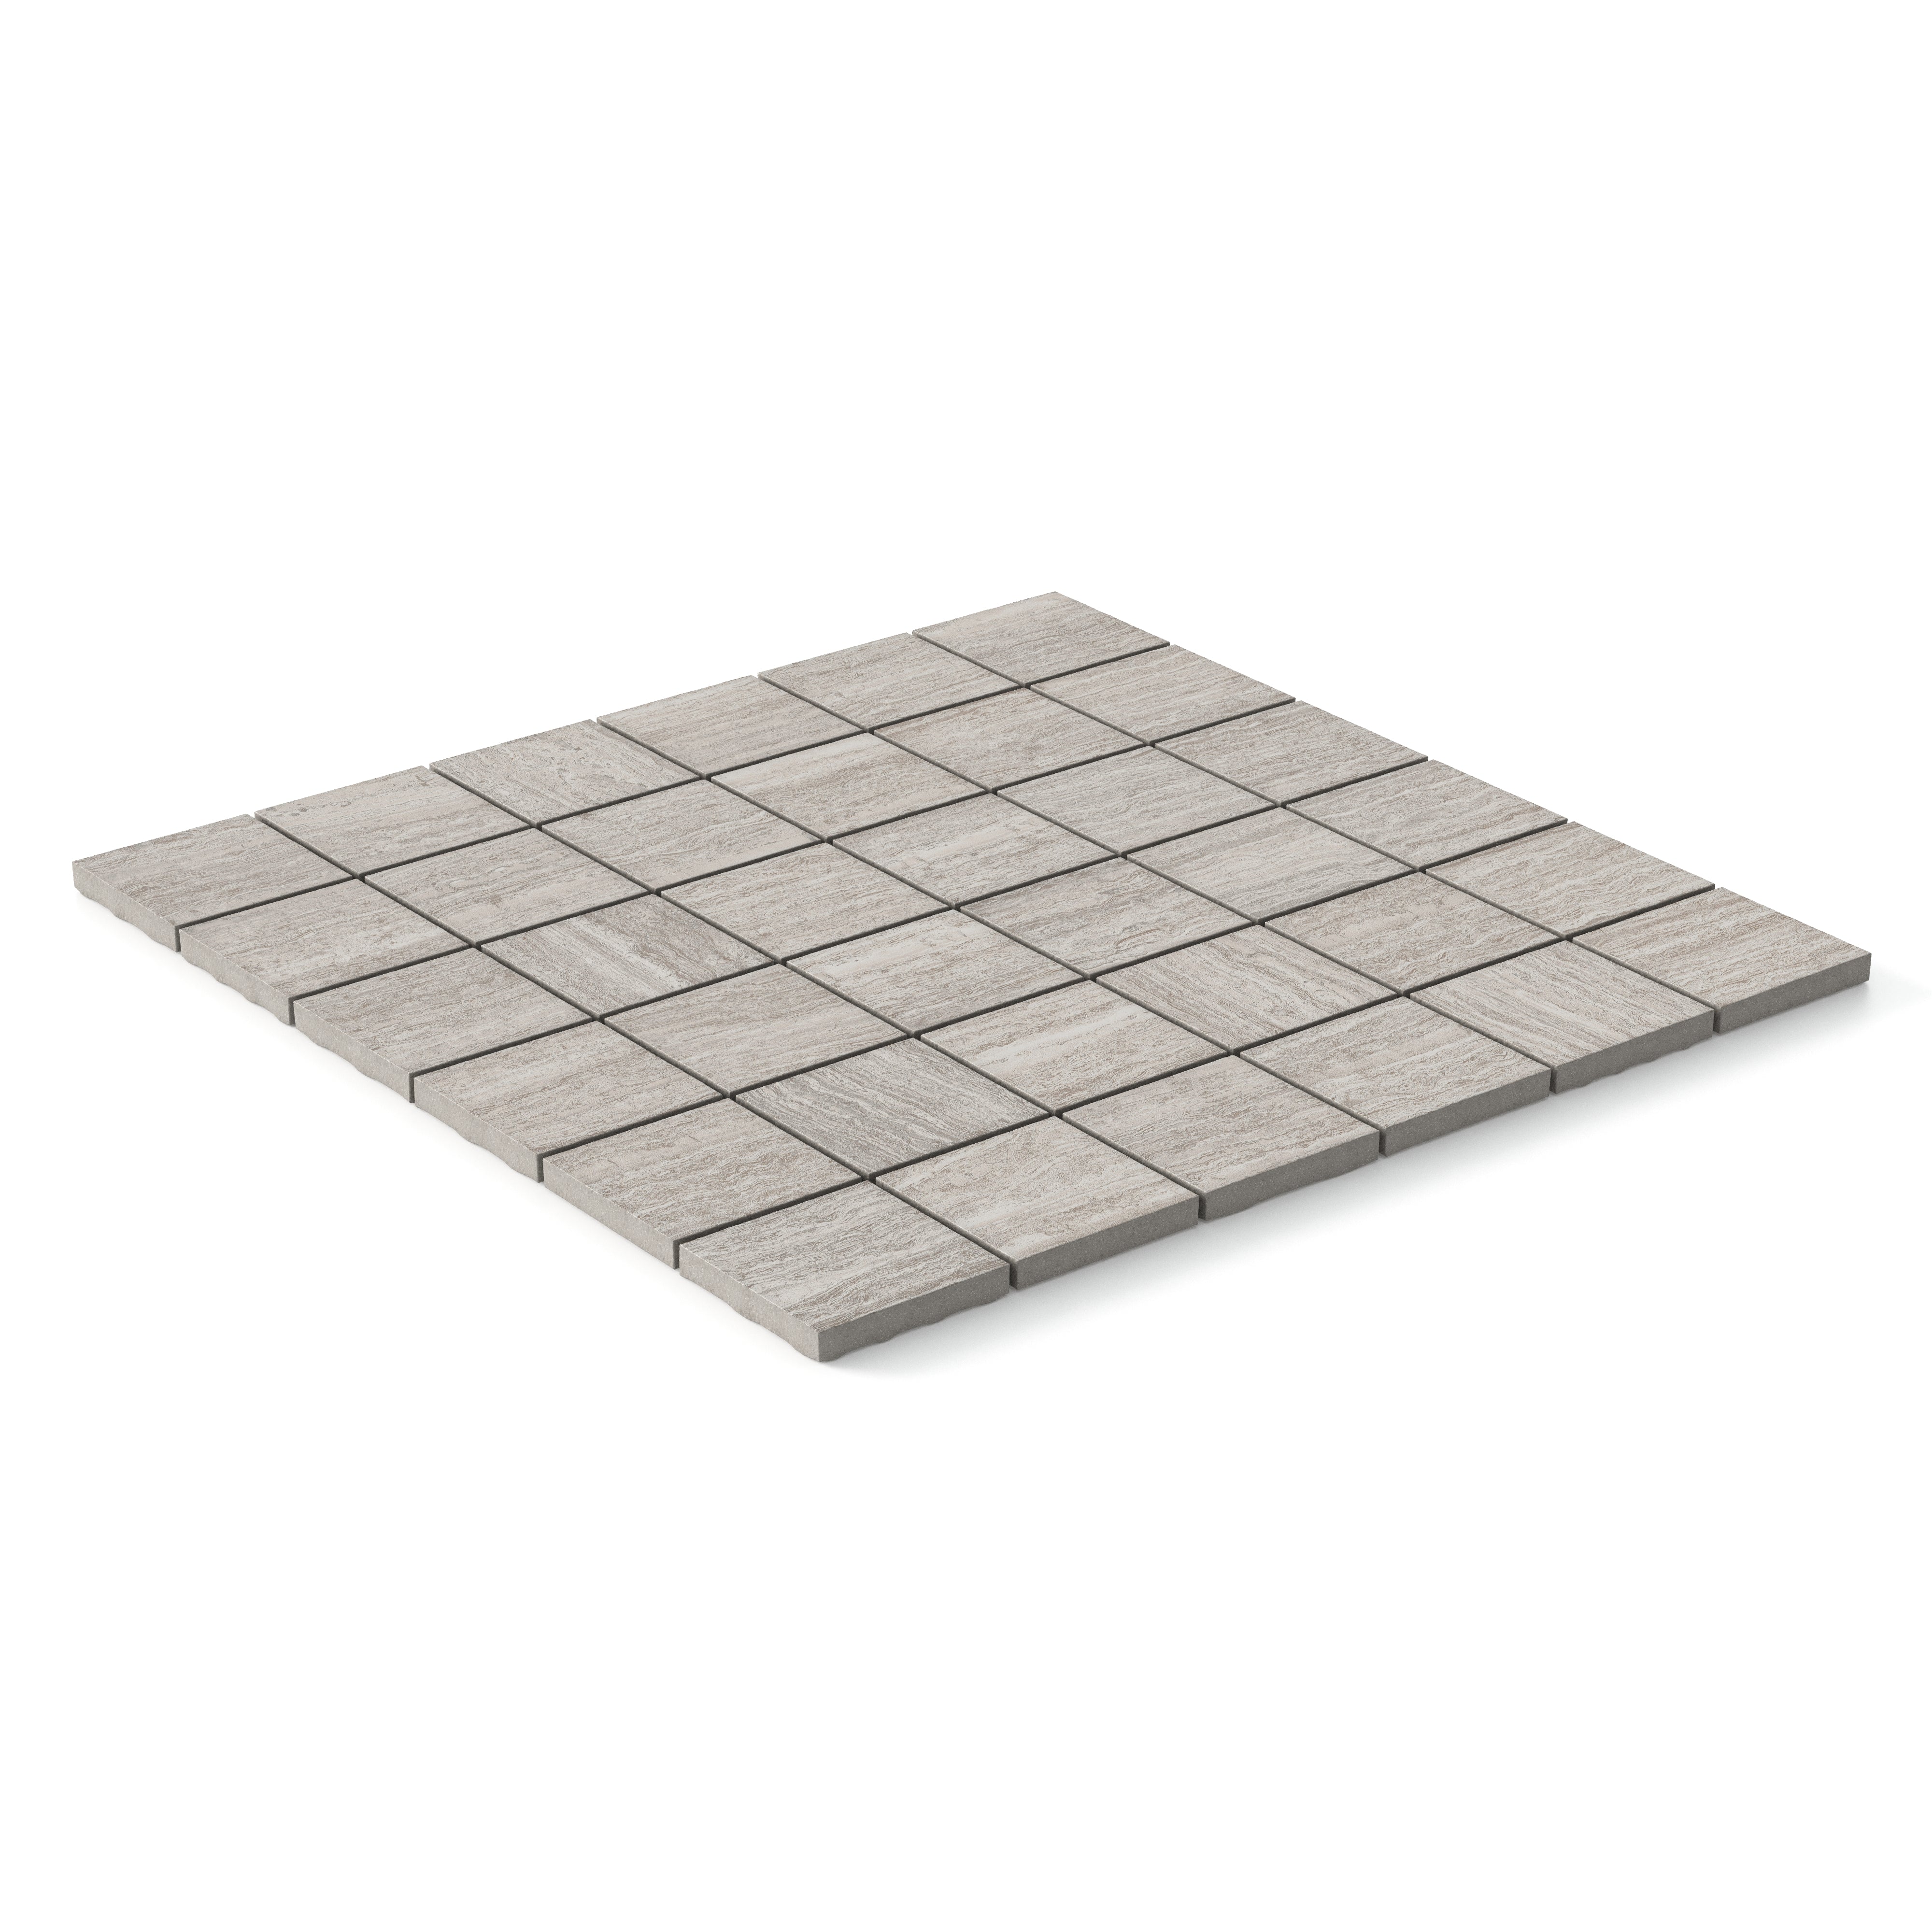 Hendrix 2x2 Matte Porcelain Mosaic Tile in Taupe